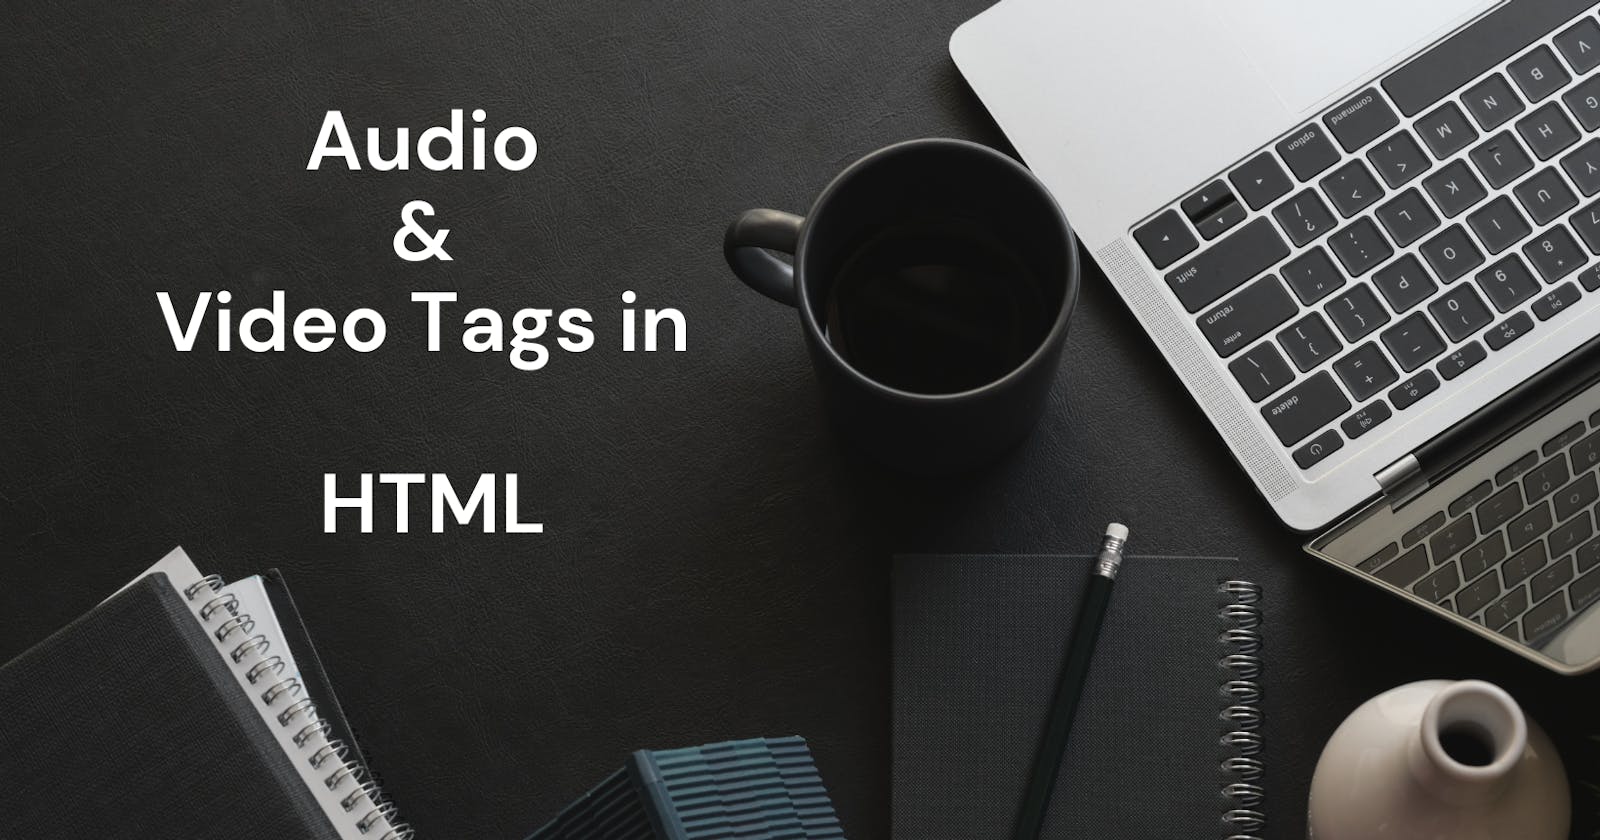 Html Audio & Video Tags And Attributes